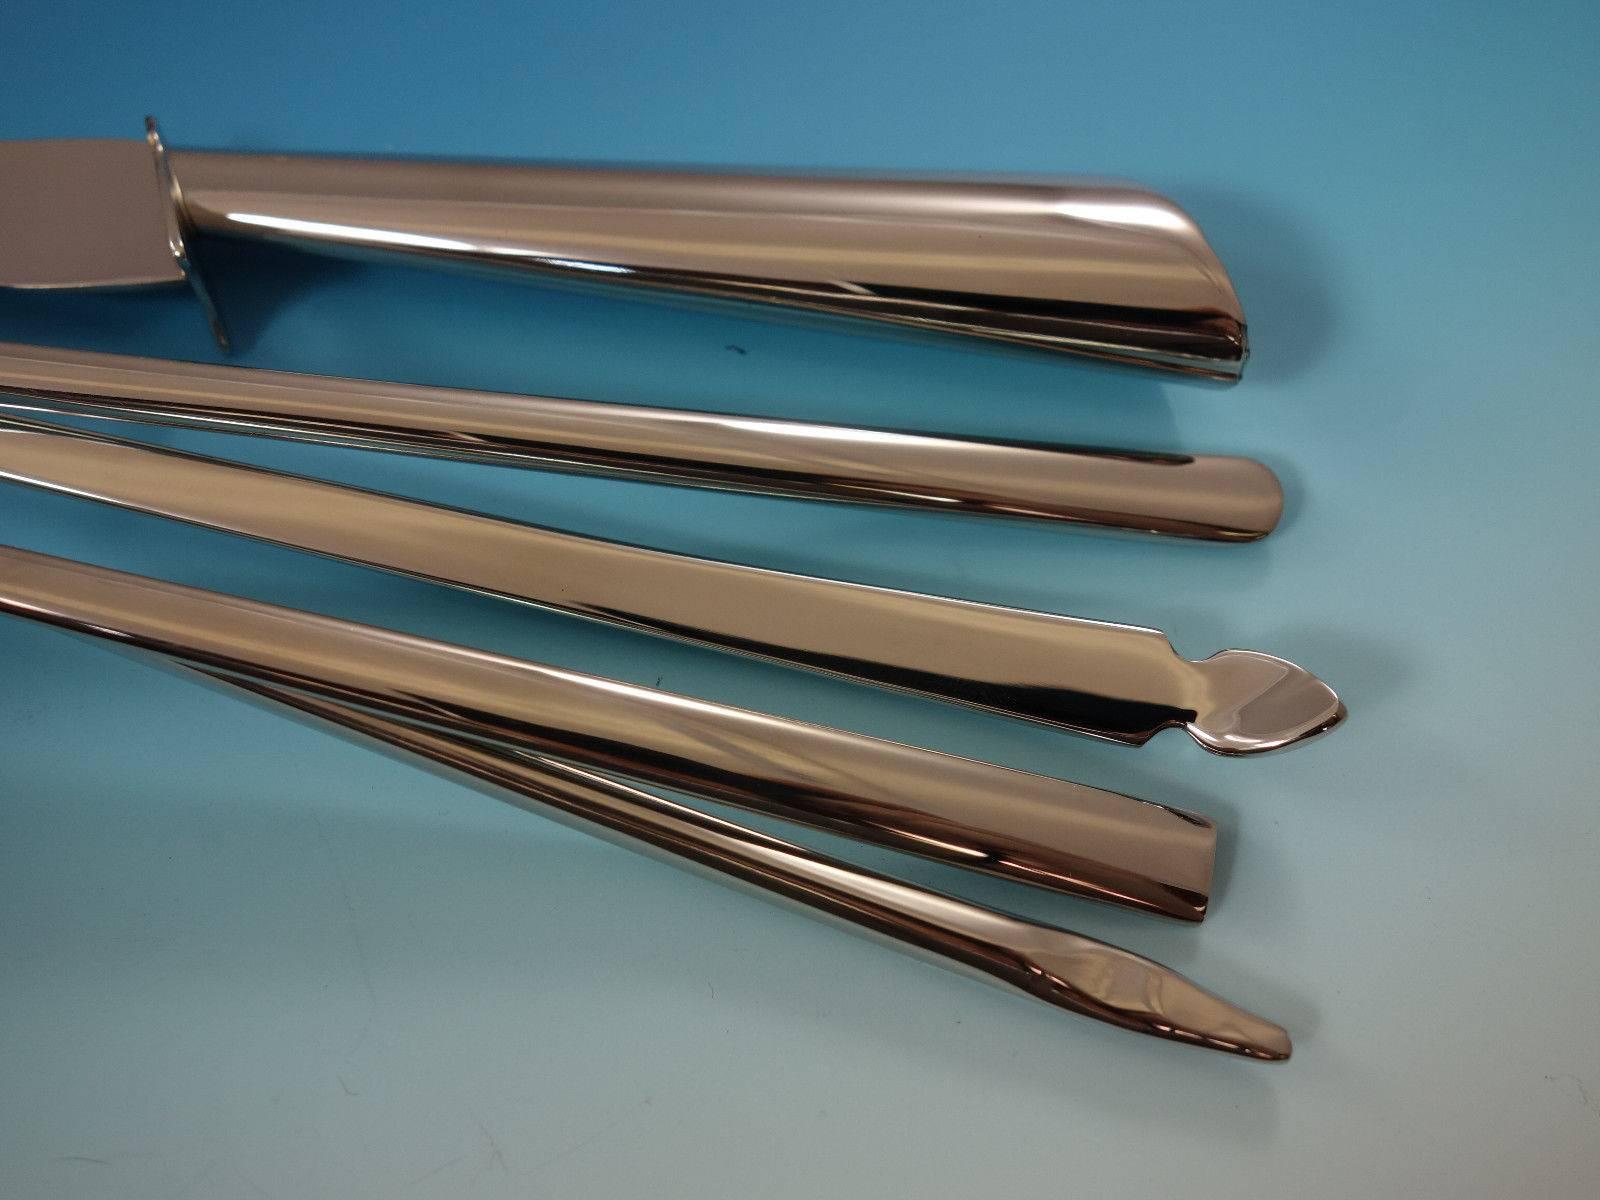 Brand new via Veneto by Ricci ultra modern and unique stainless steel flatware set, 62 pieces. Via Veneto is one of the most unusual patterns we offer - there is truly nothing like it. The long, slender handles and the wavy design are art for your